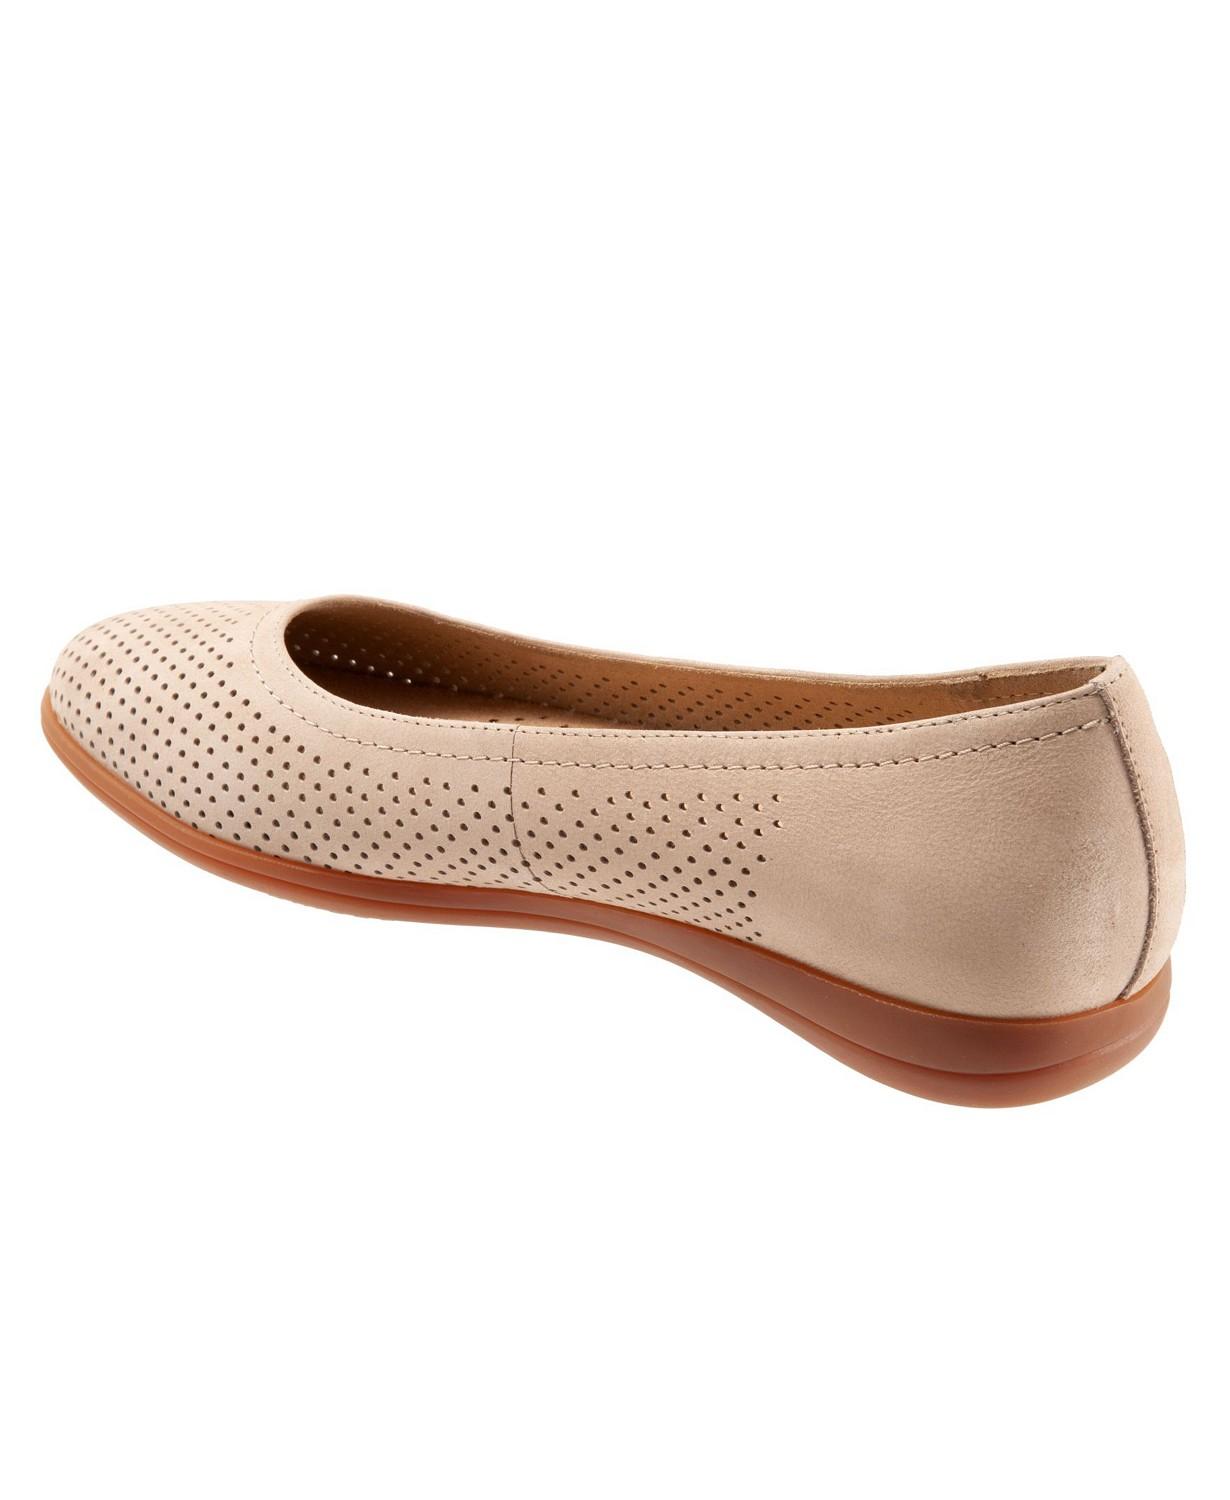 Trotters Womens Darcey Perforated Flats LT BEIGE Size 9.0 for sale ...